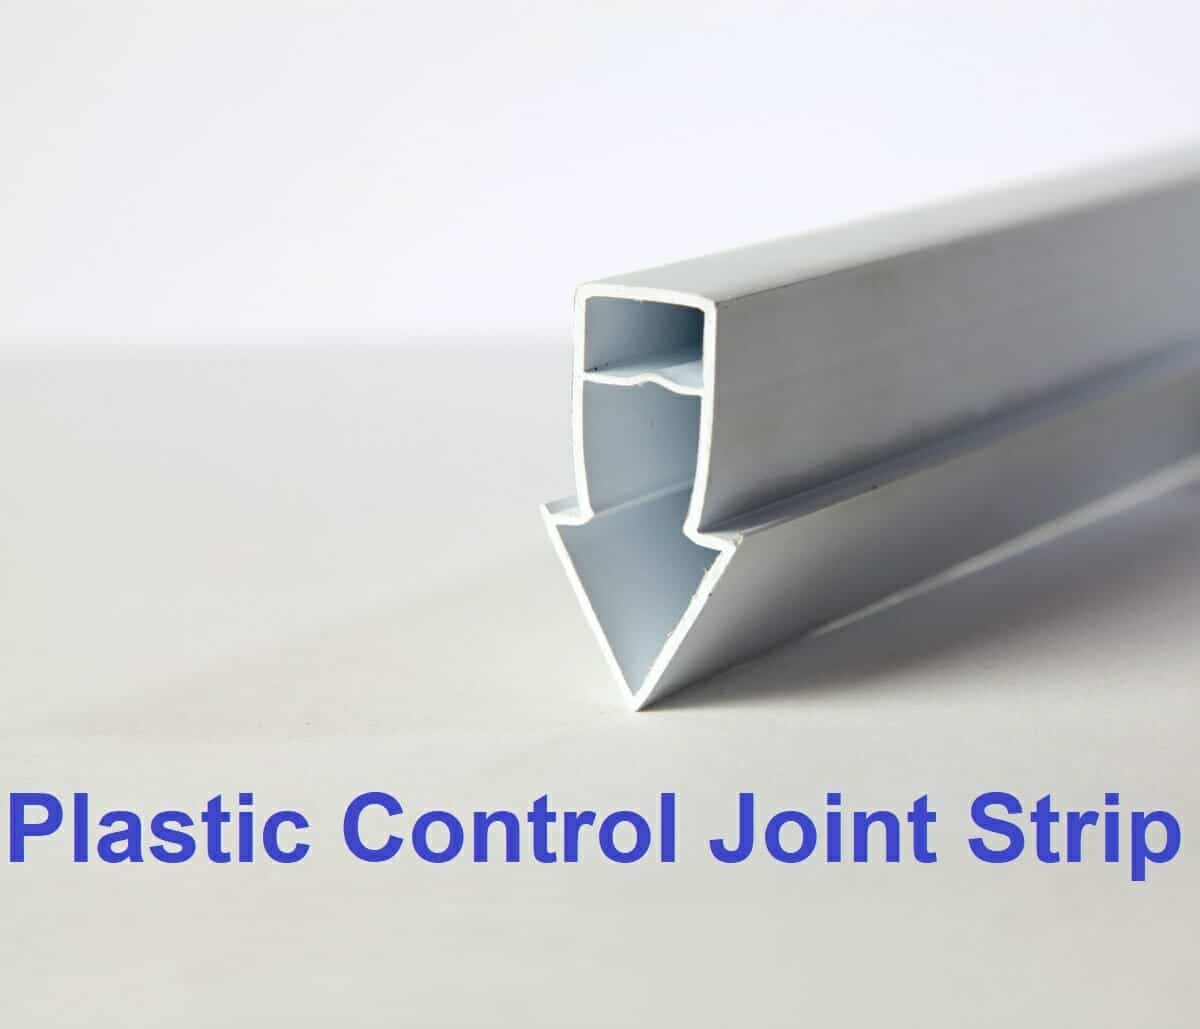 Plastic control joint